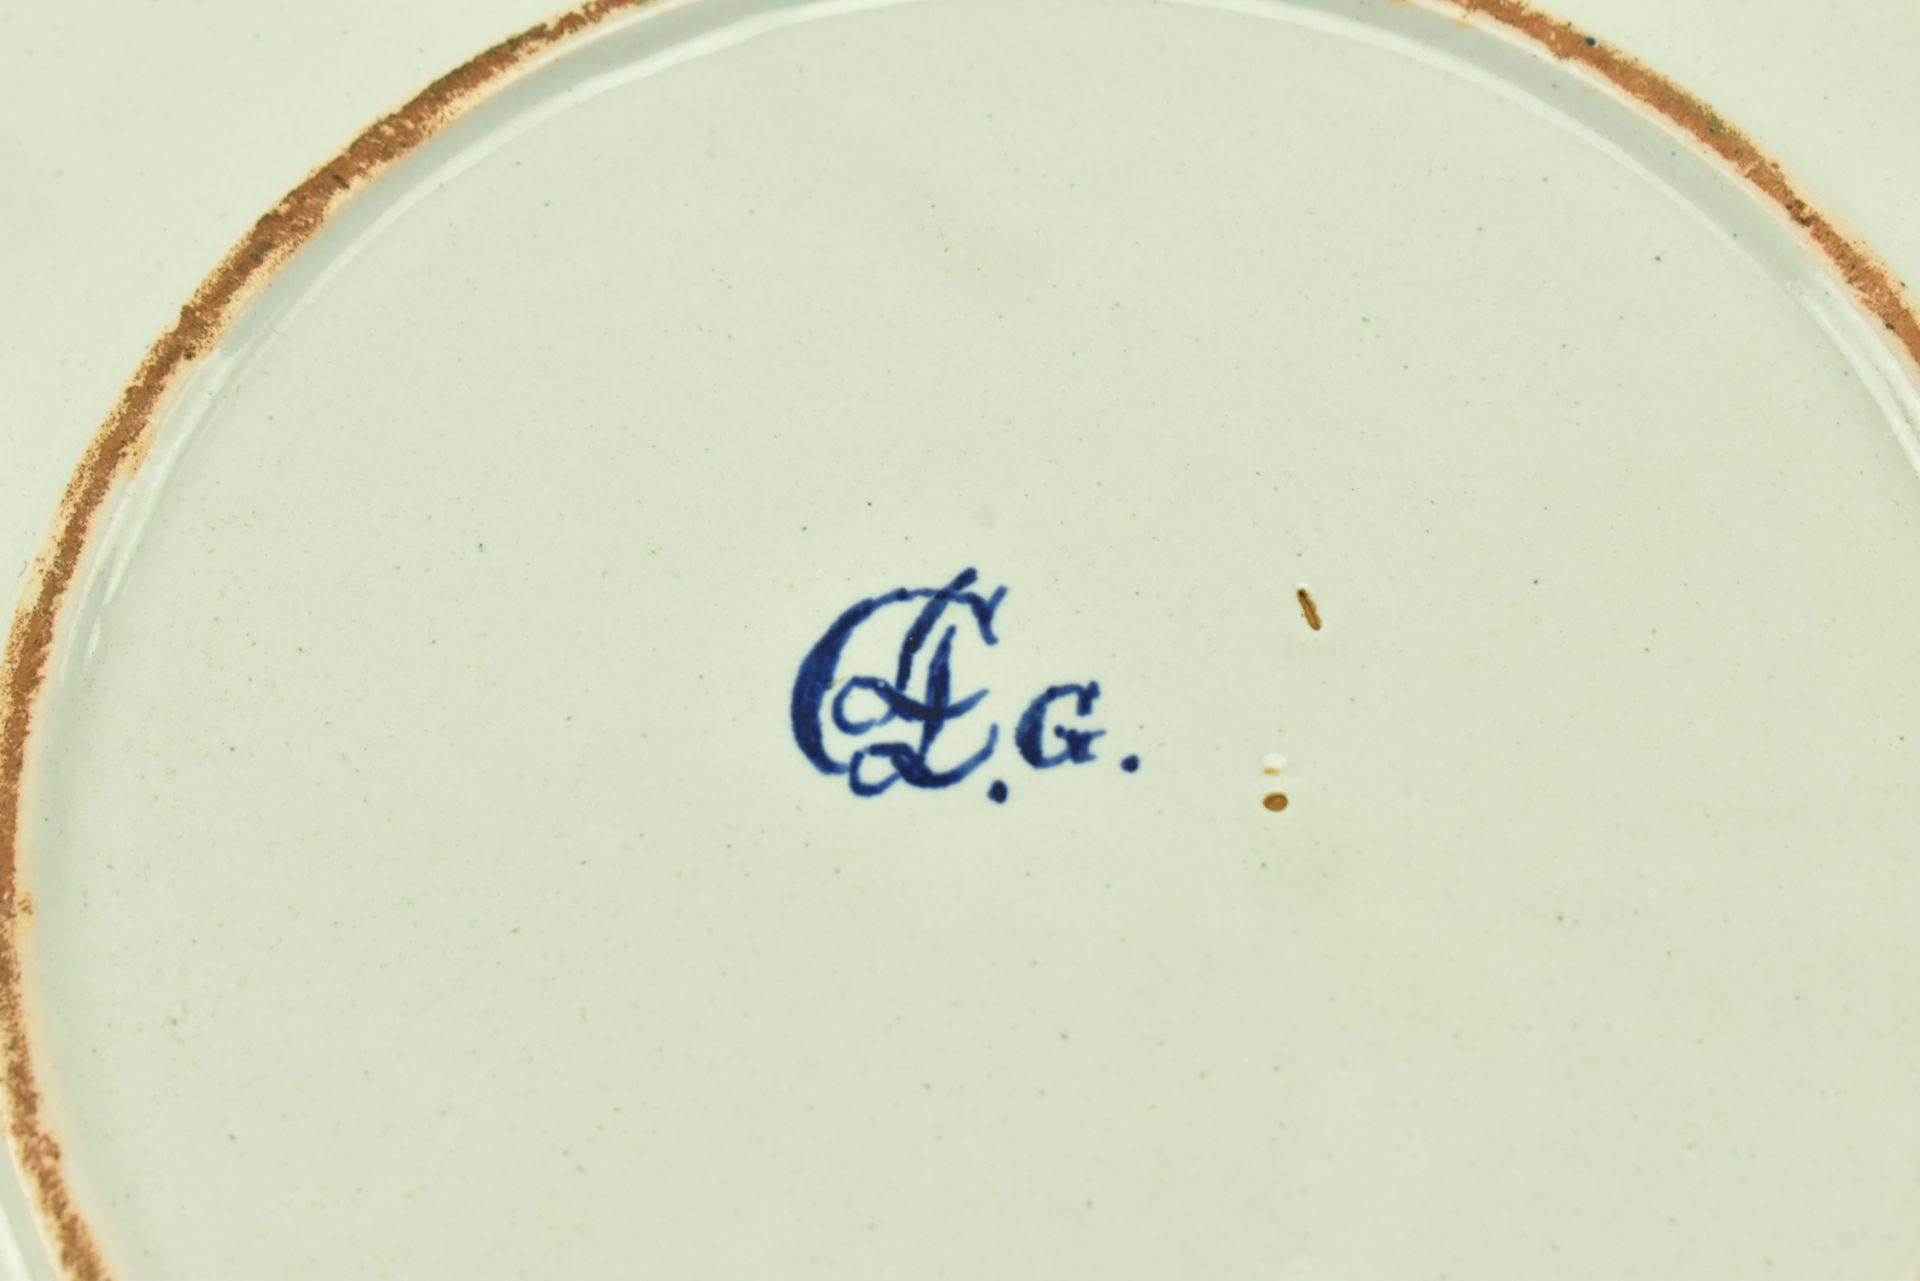 18TH CENTURY CONTINENTAL DELFT POLYCHROME TIN GLAZED PLATE - Image 7 of 7